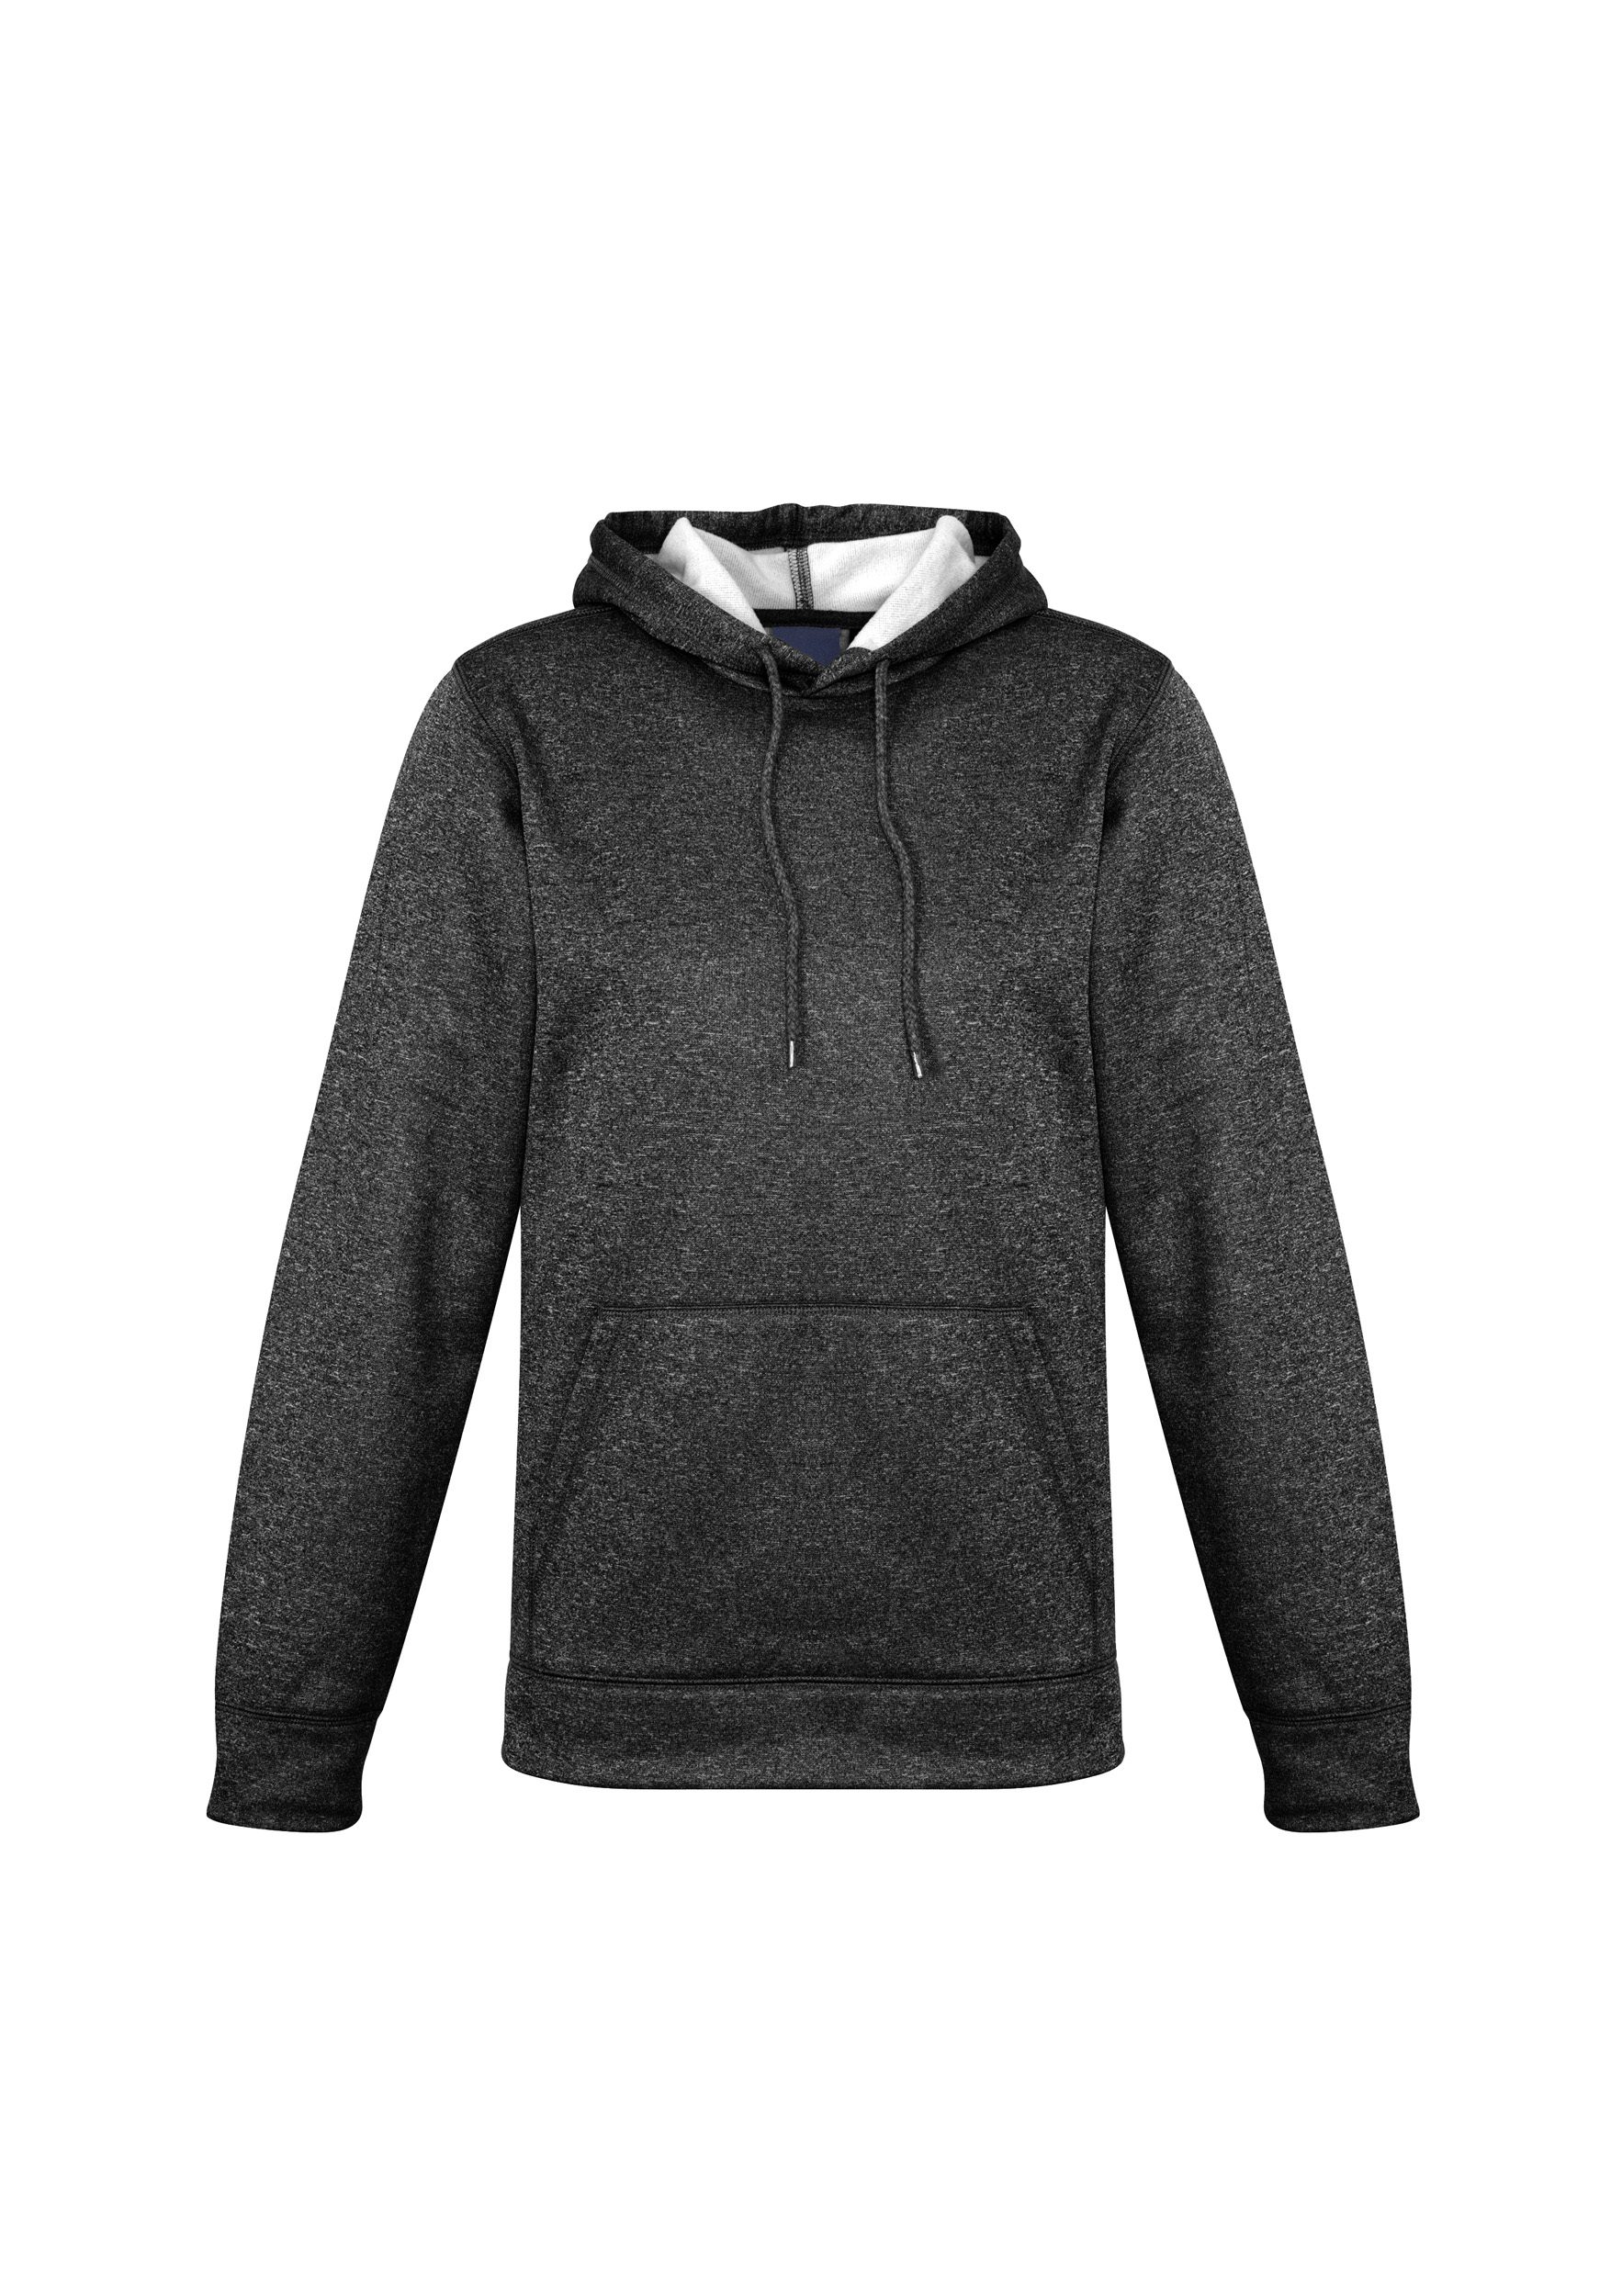 Biz Collection Ladies Hype Pull-On Hoodie #SW239LL Black Marle